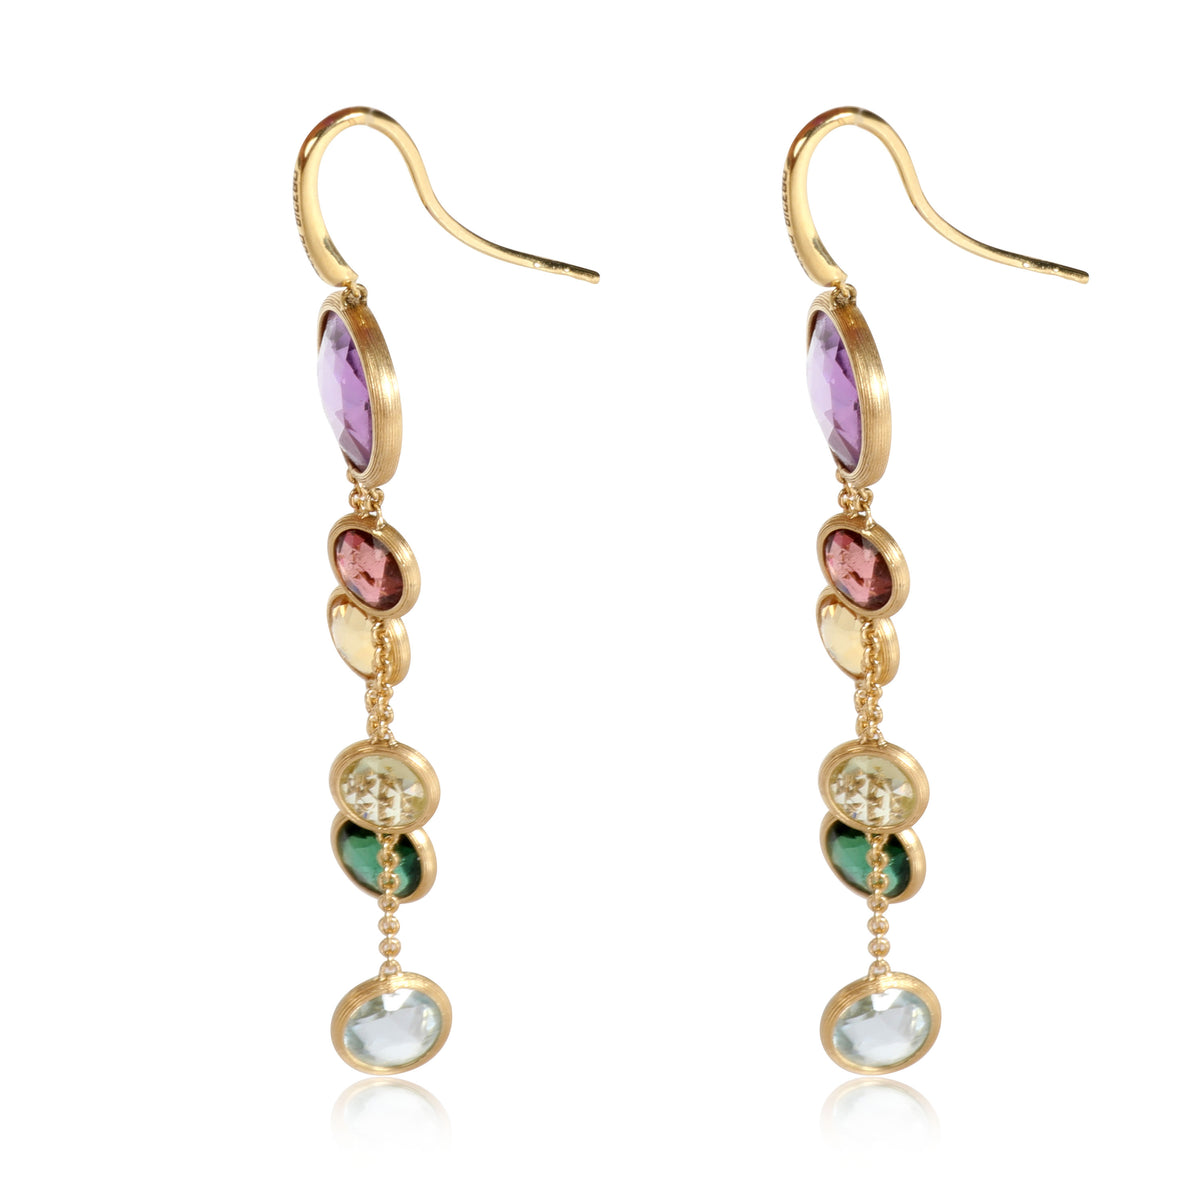 Marco Bicego Jaipur Mixed Gemstone Drop Earrings in 18KT Yellow Gold